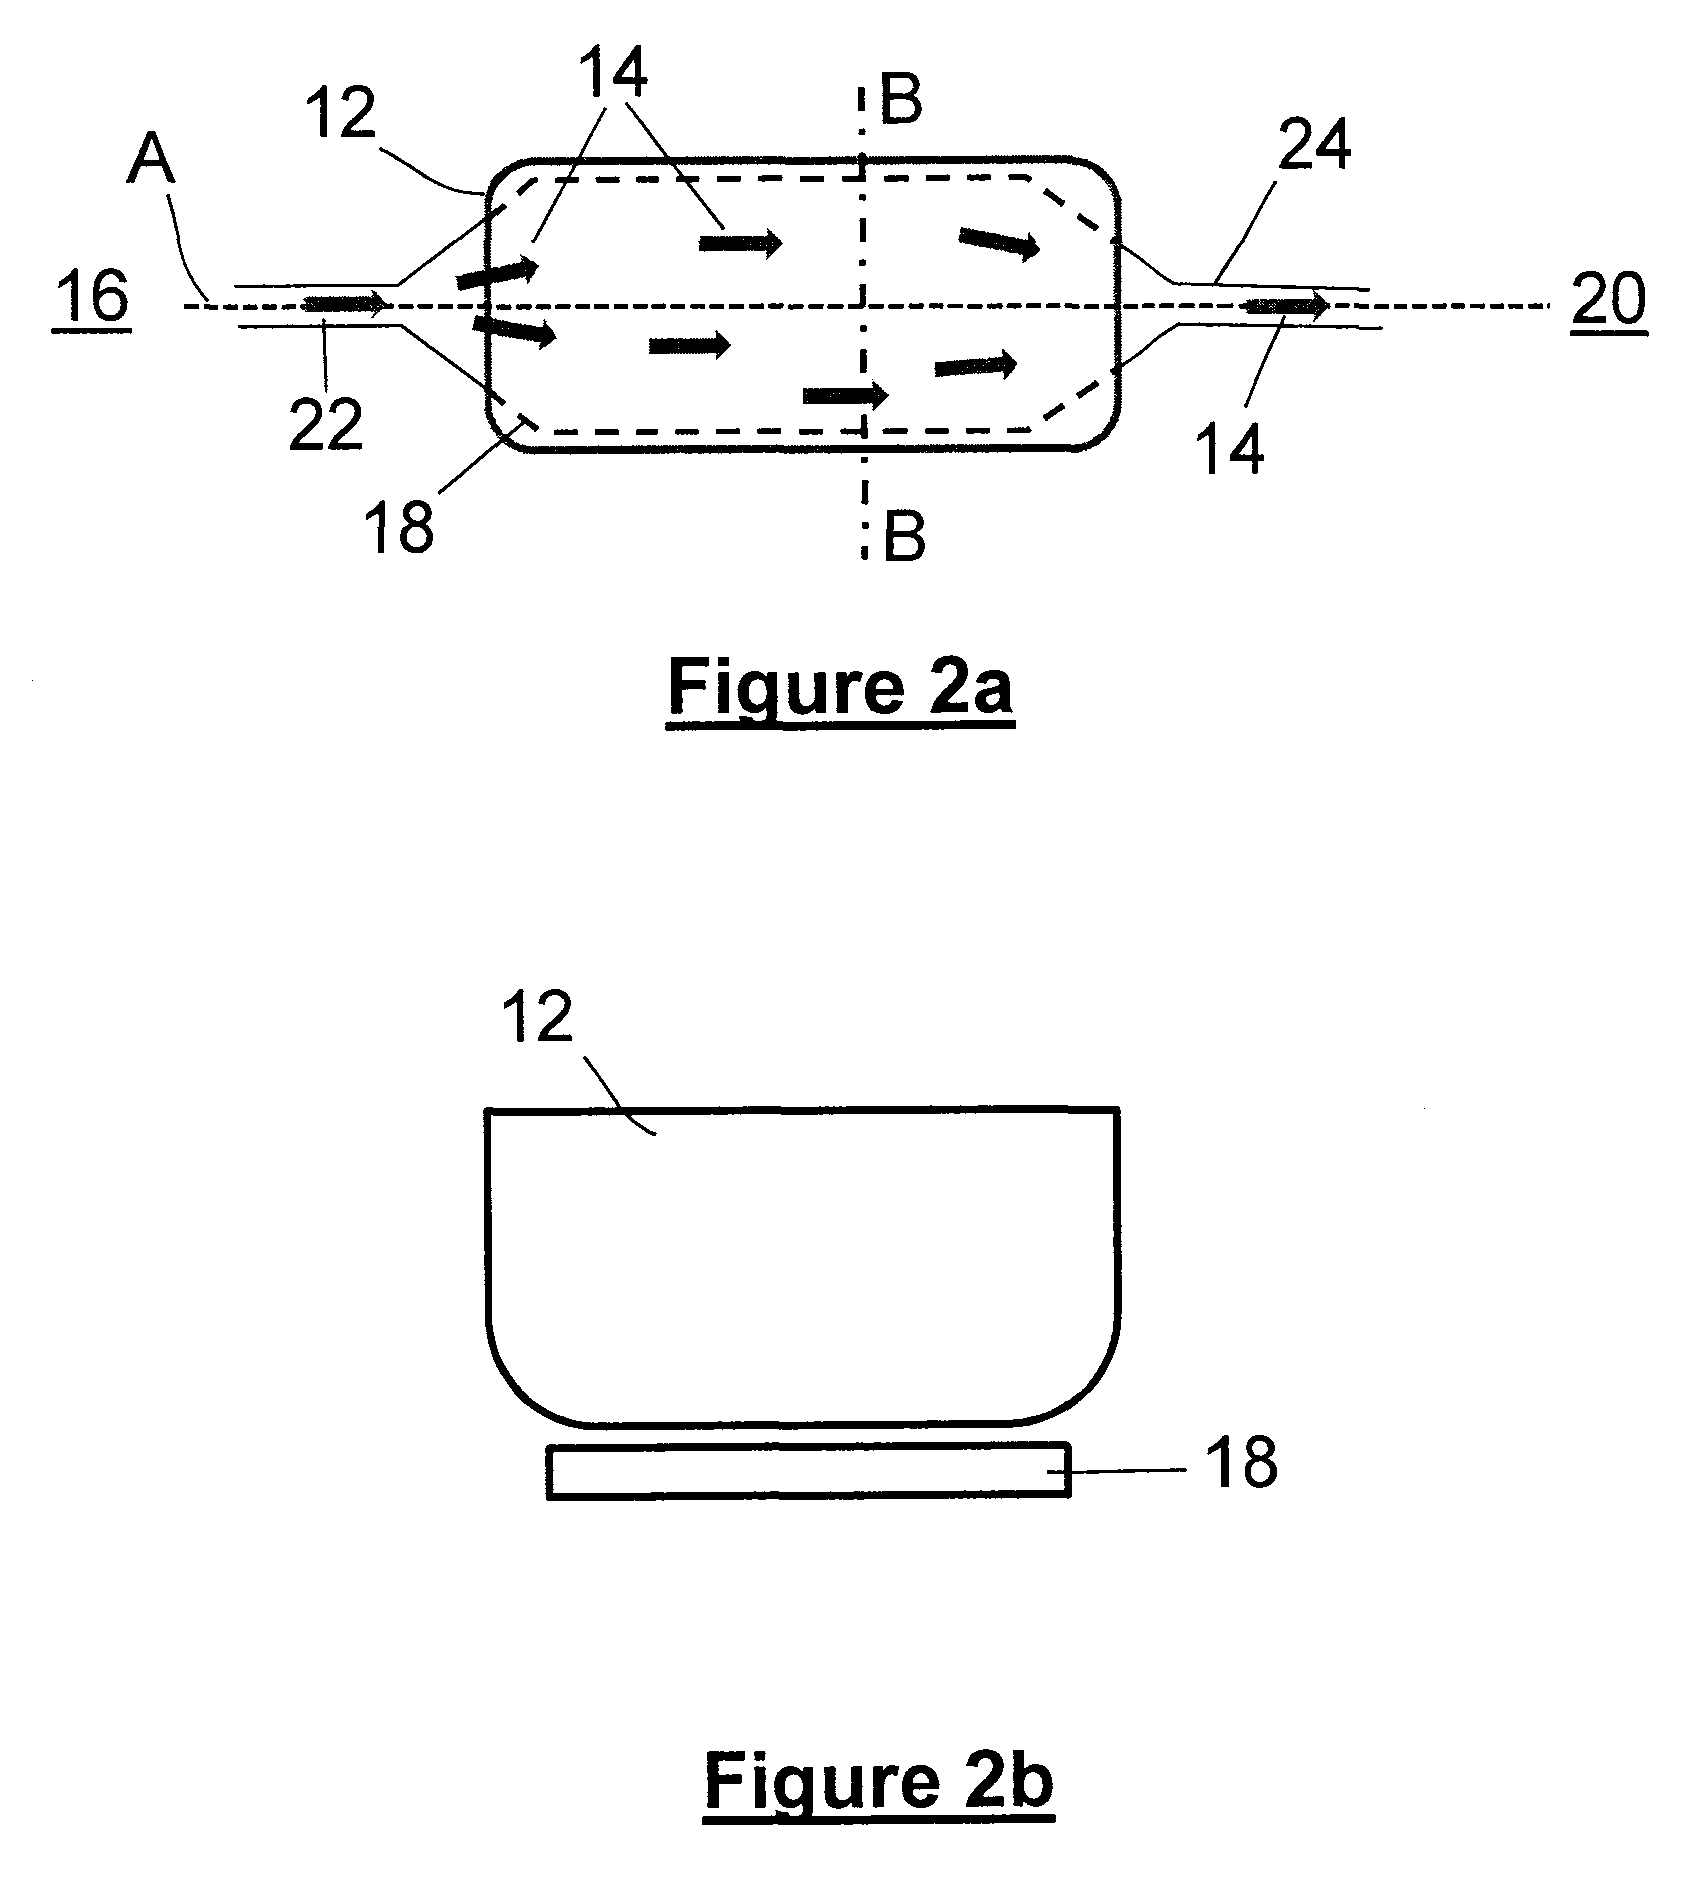 Method and apparatus for cooling fuel in an aircraft fuel tank